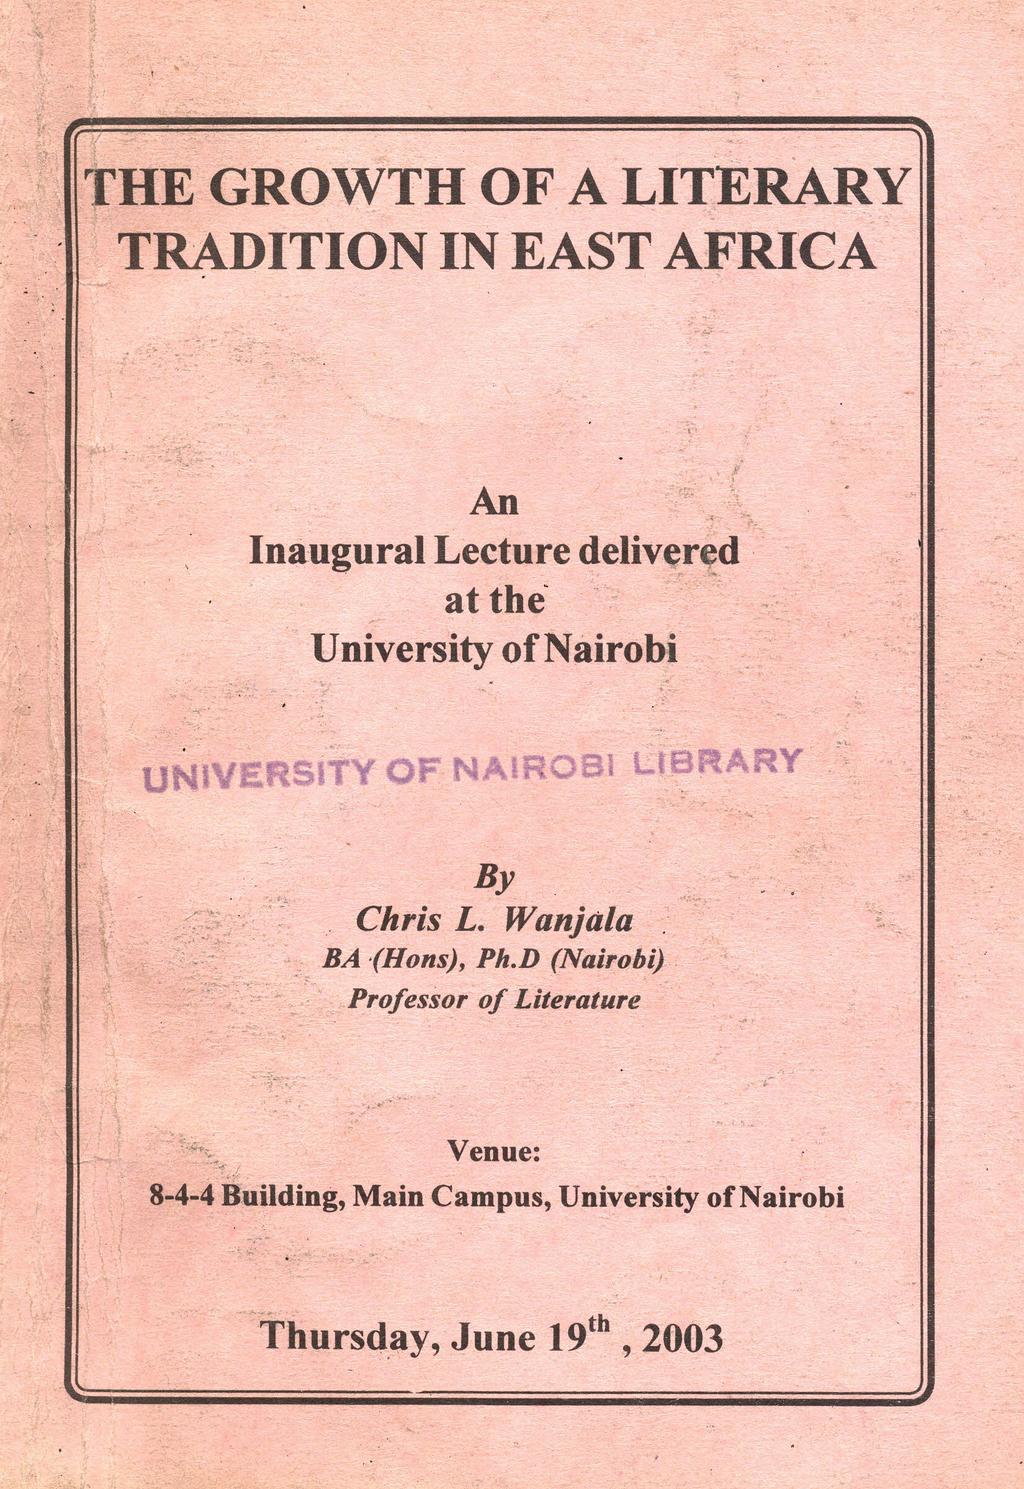 ! THE GROWTH OF A LITERARY TRADITION IN EAST AFRICA \! An vr- - Inaugural Lecture delivered. at the' University of Nairobi u E ITYO 81 LrB RY " /',.